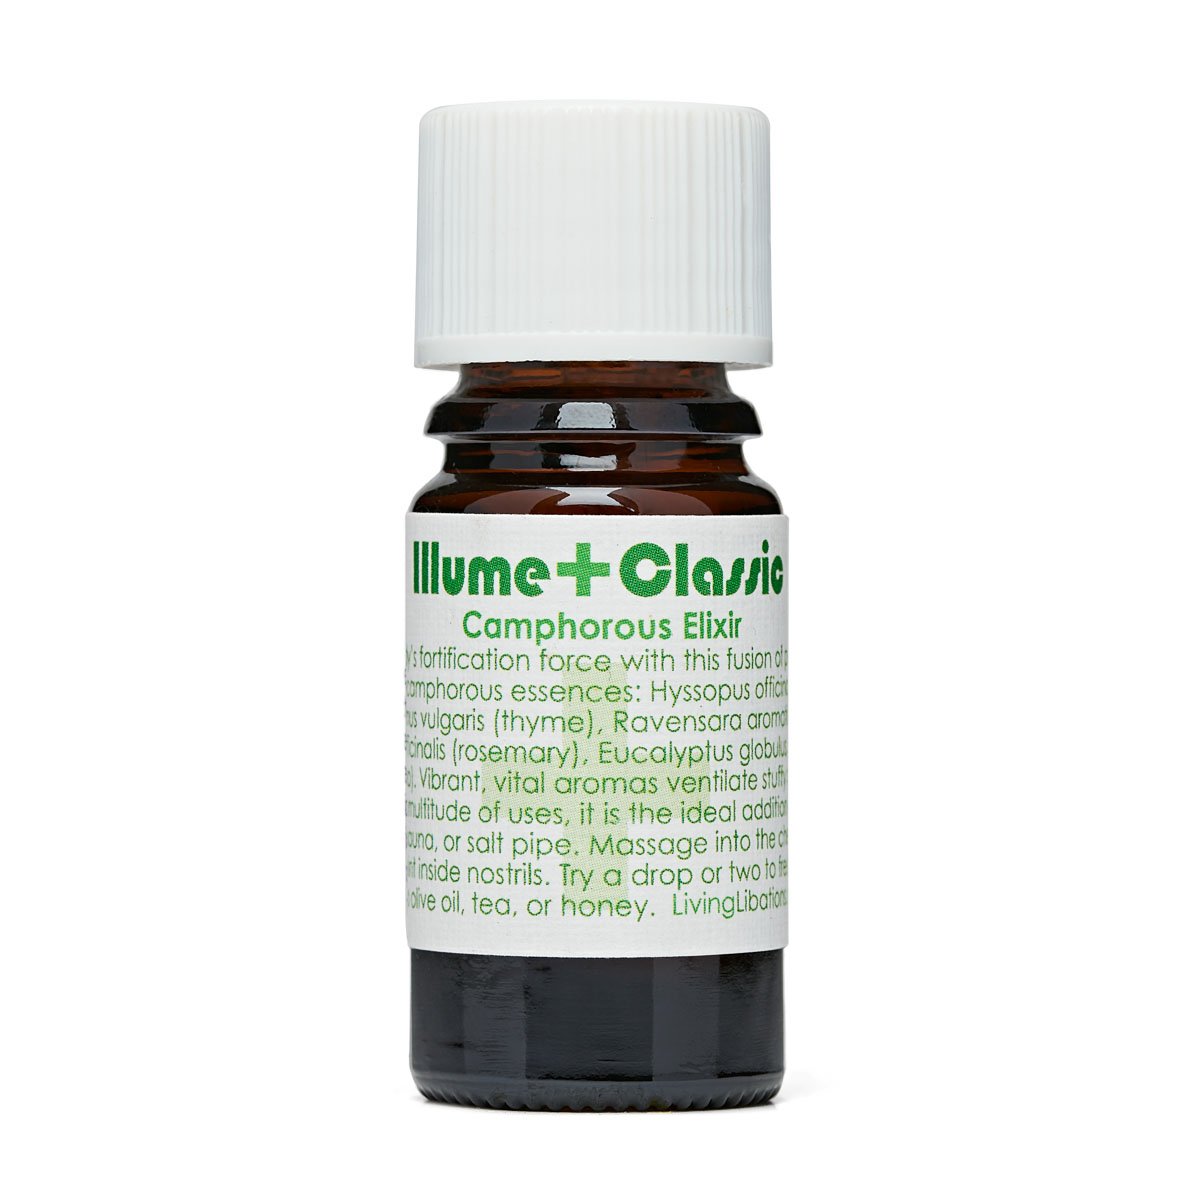 Illume Classic Camphorous | Living Libations | Raw Living UK | Health Nectar | Living Libations (5, 15ml) is a mix of Anti-Bacterial, Anti-Fungal &amp; Anti-Viral agents for clear lungs: Hyssop, Thyme, Ravensara, Rosemary, Eucalyptus &amp; Oregano